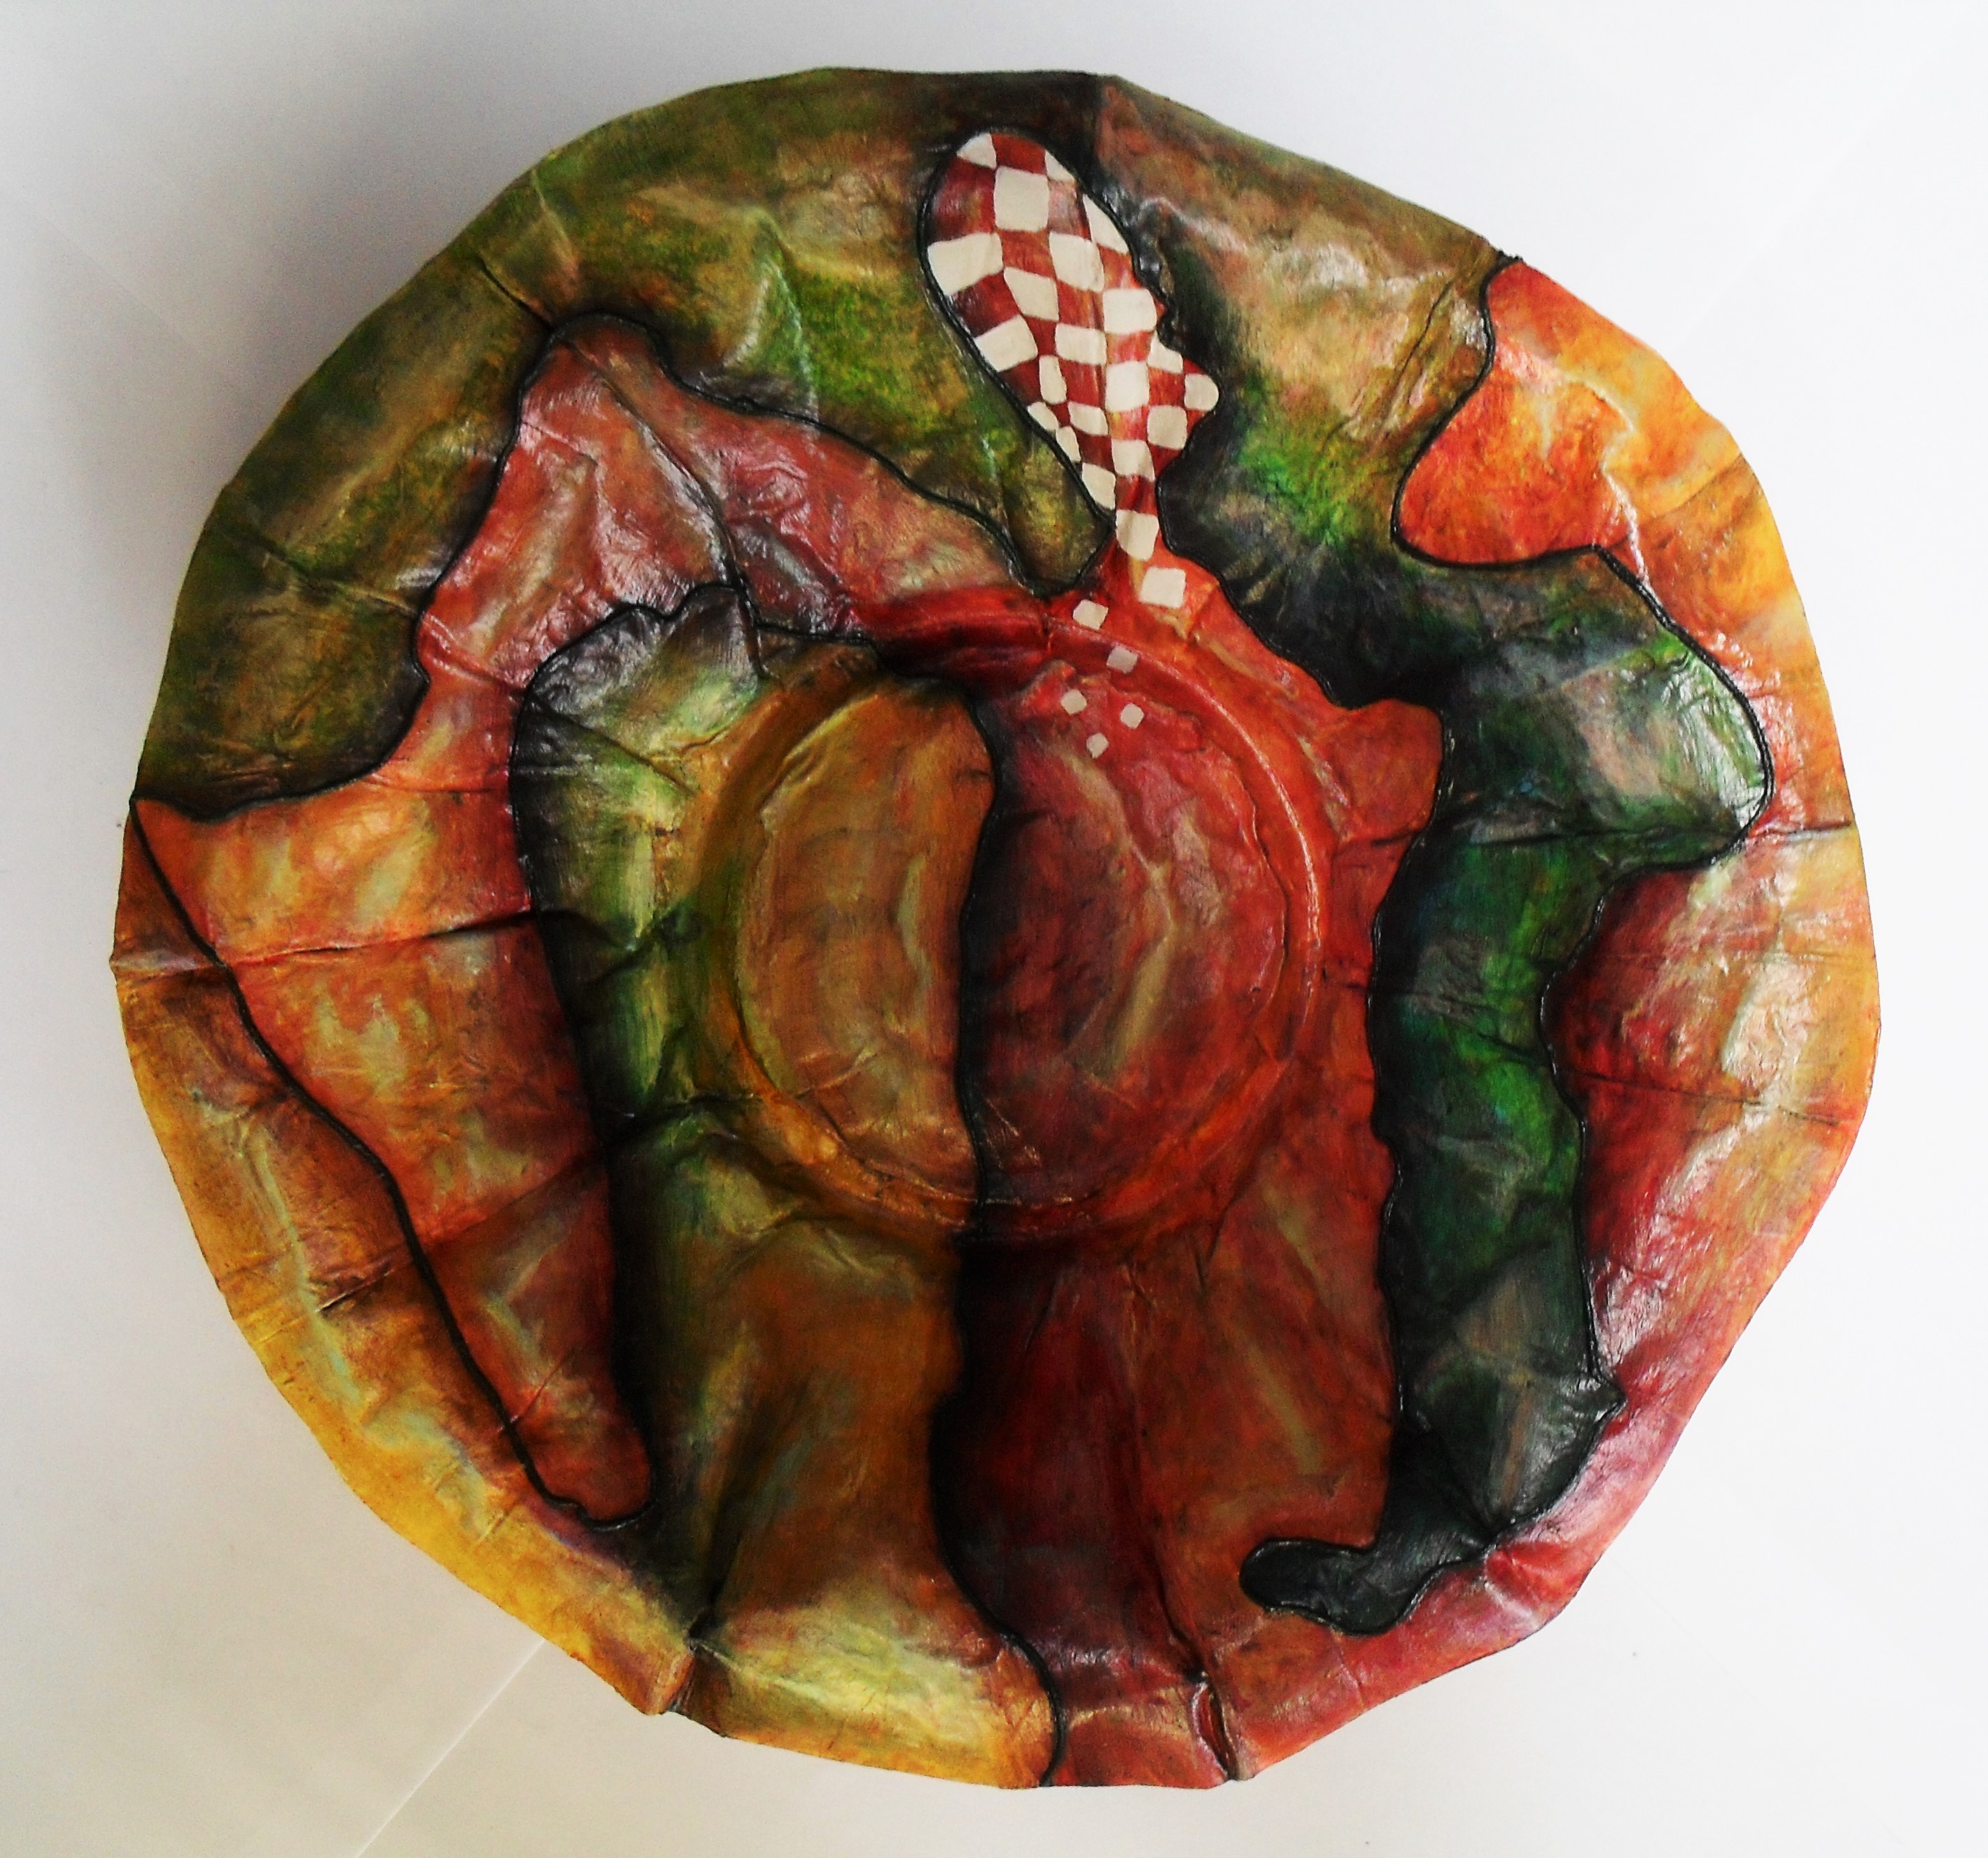 Bowl made of paper mache, painted with acrylics, varnished with yacht varnish art and design by lia van Elffenbrinck